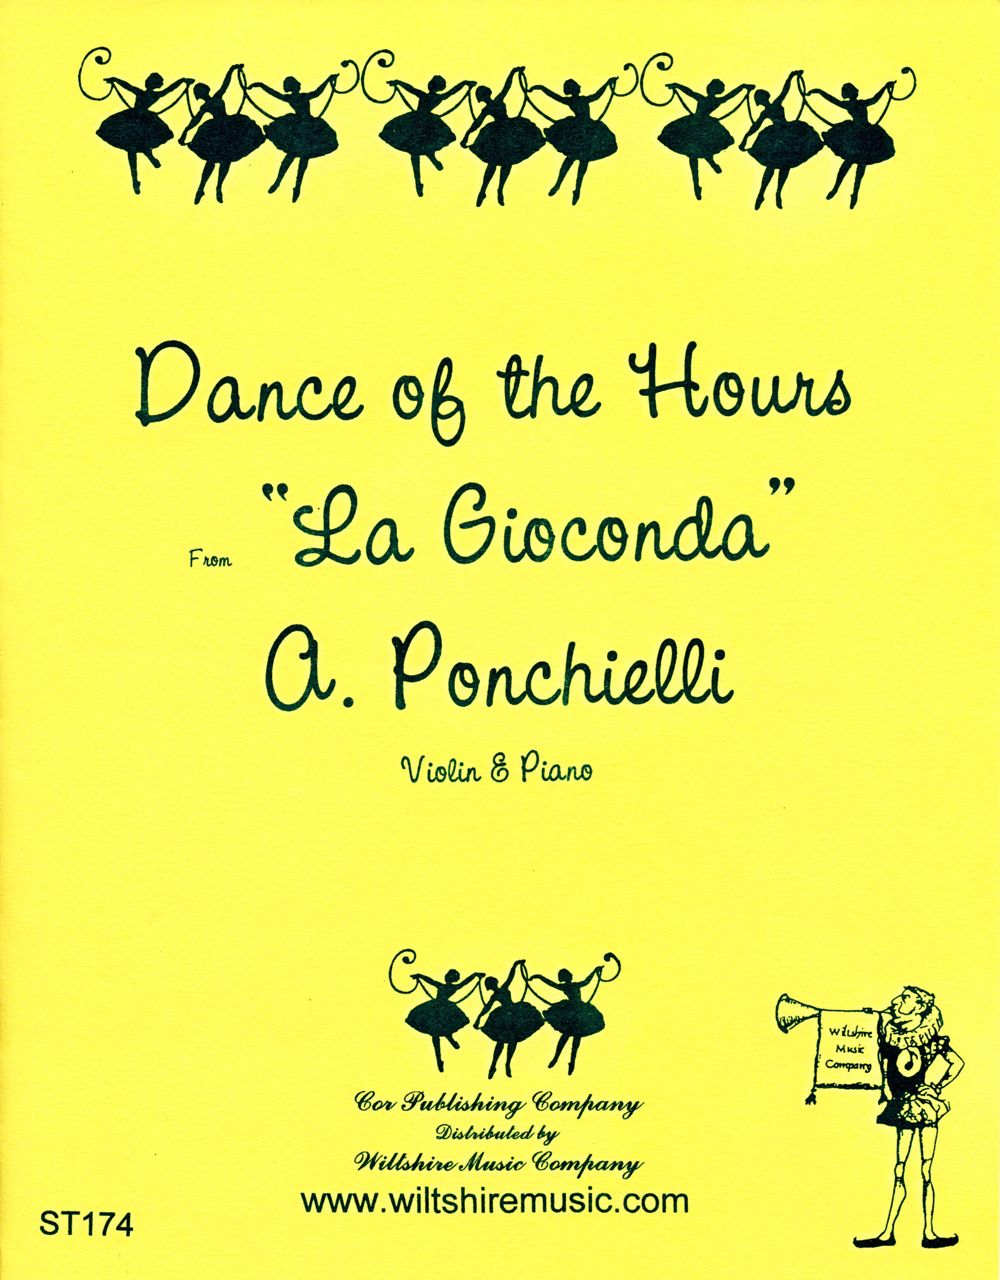 Dance of the Hours - PONCHIELLI, A.